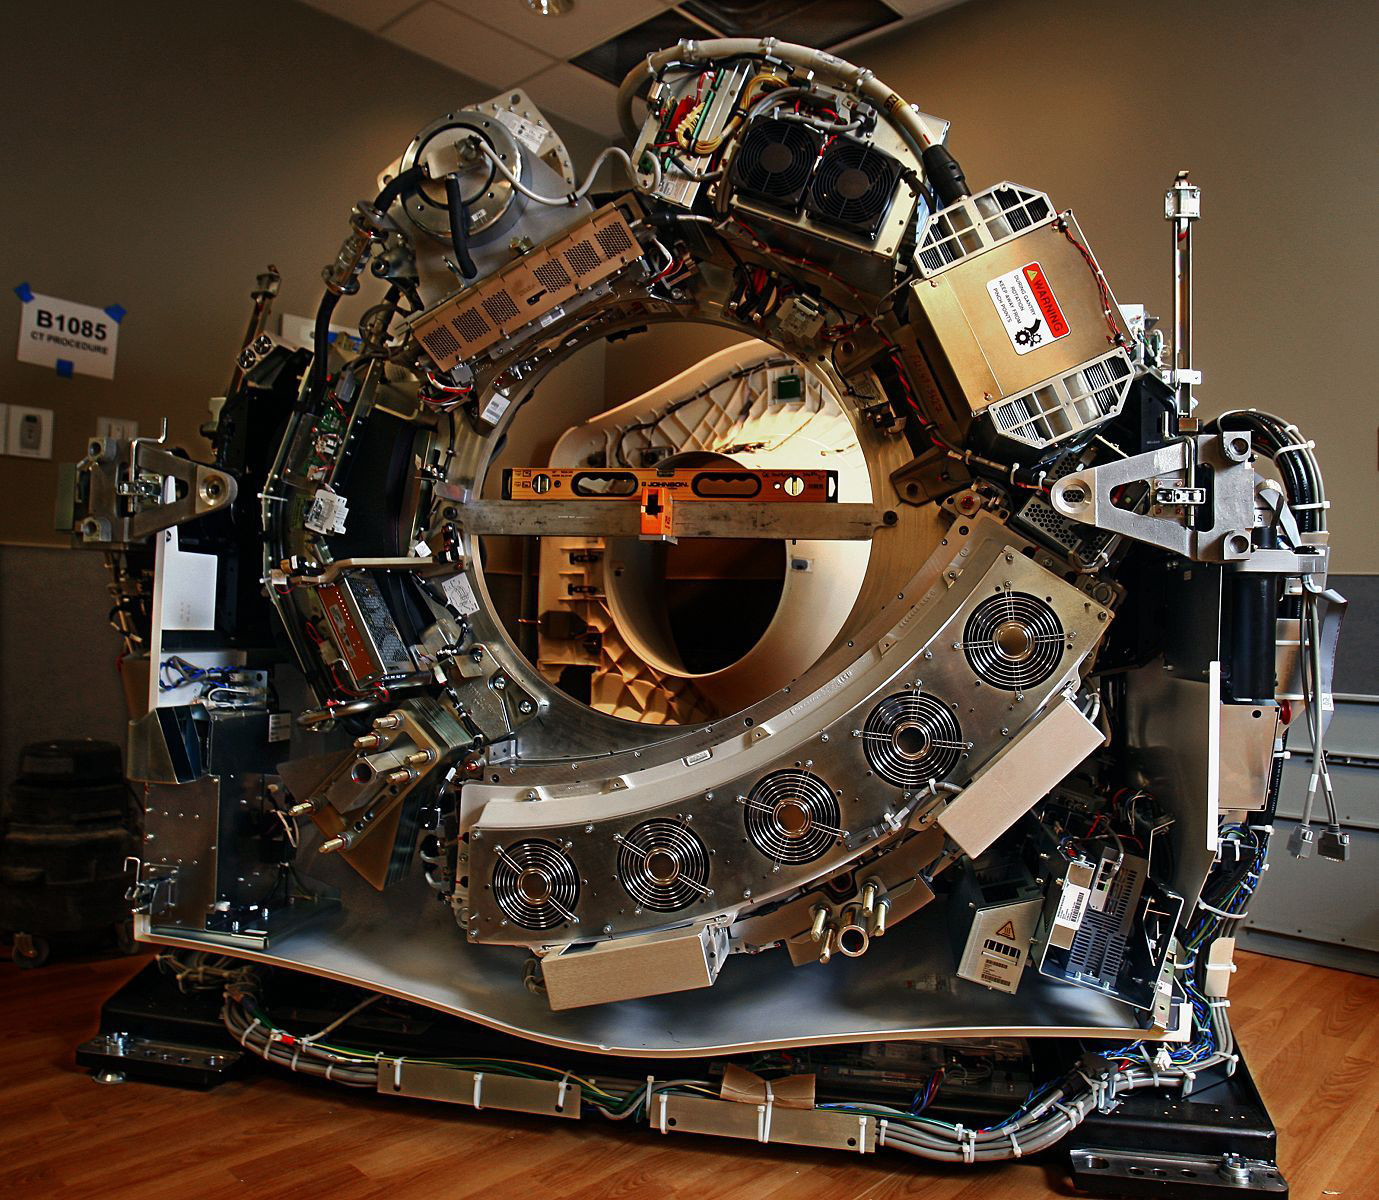 A brand new HD750, GE CT Scanner